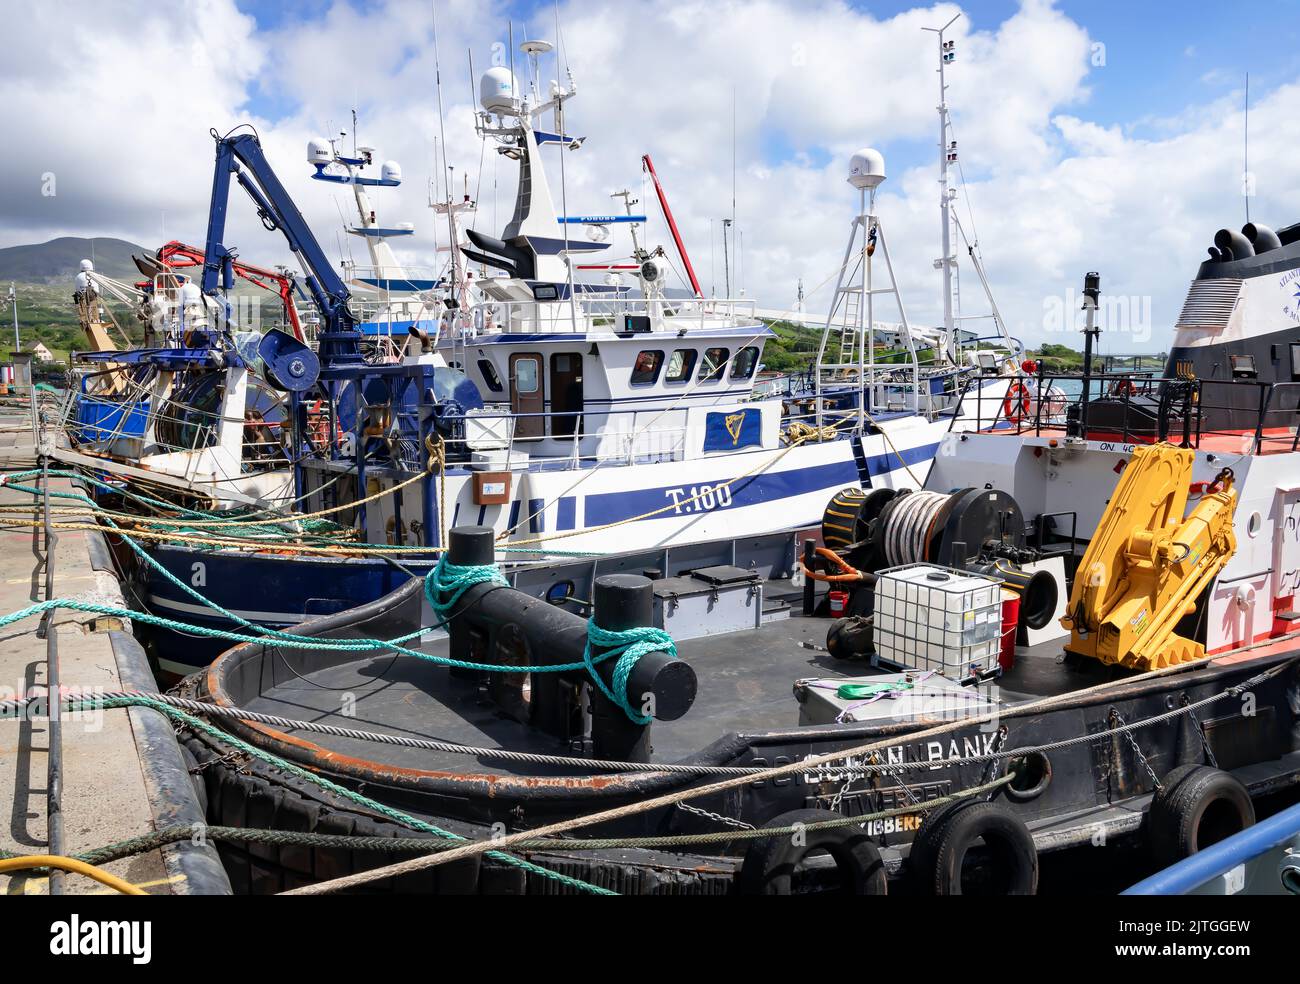 Fishing Boats lined up in the Harbour in Castletownbere, County Cork, Ireland Stock Photo